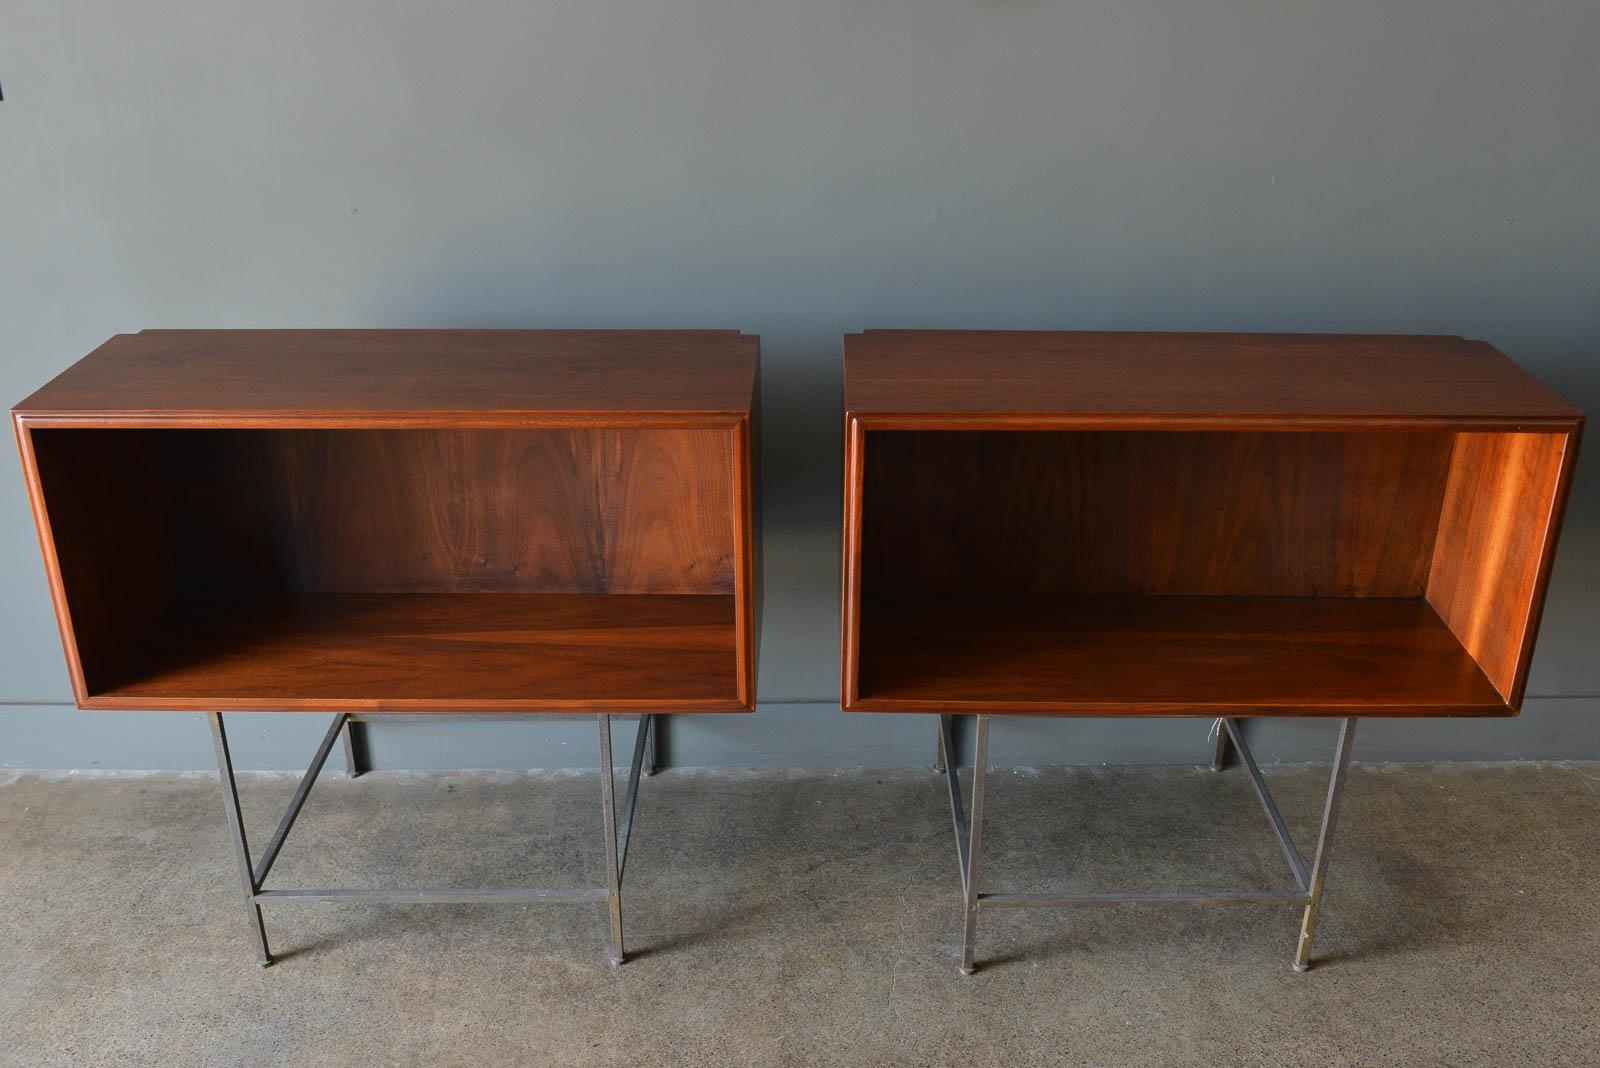 American Walnut Floating Cabinets or Nightstands, ca. 1955